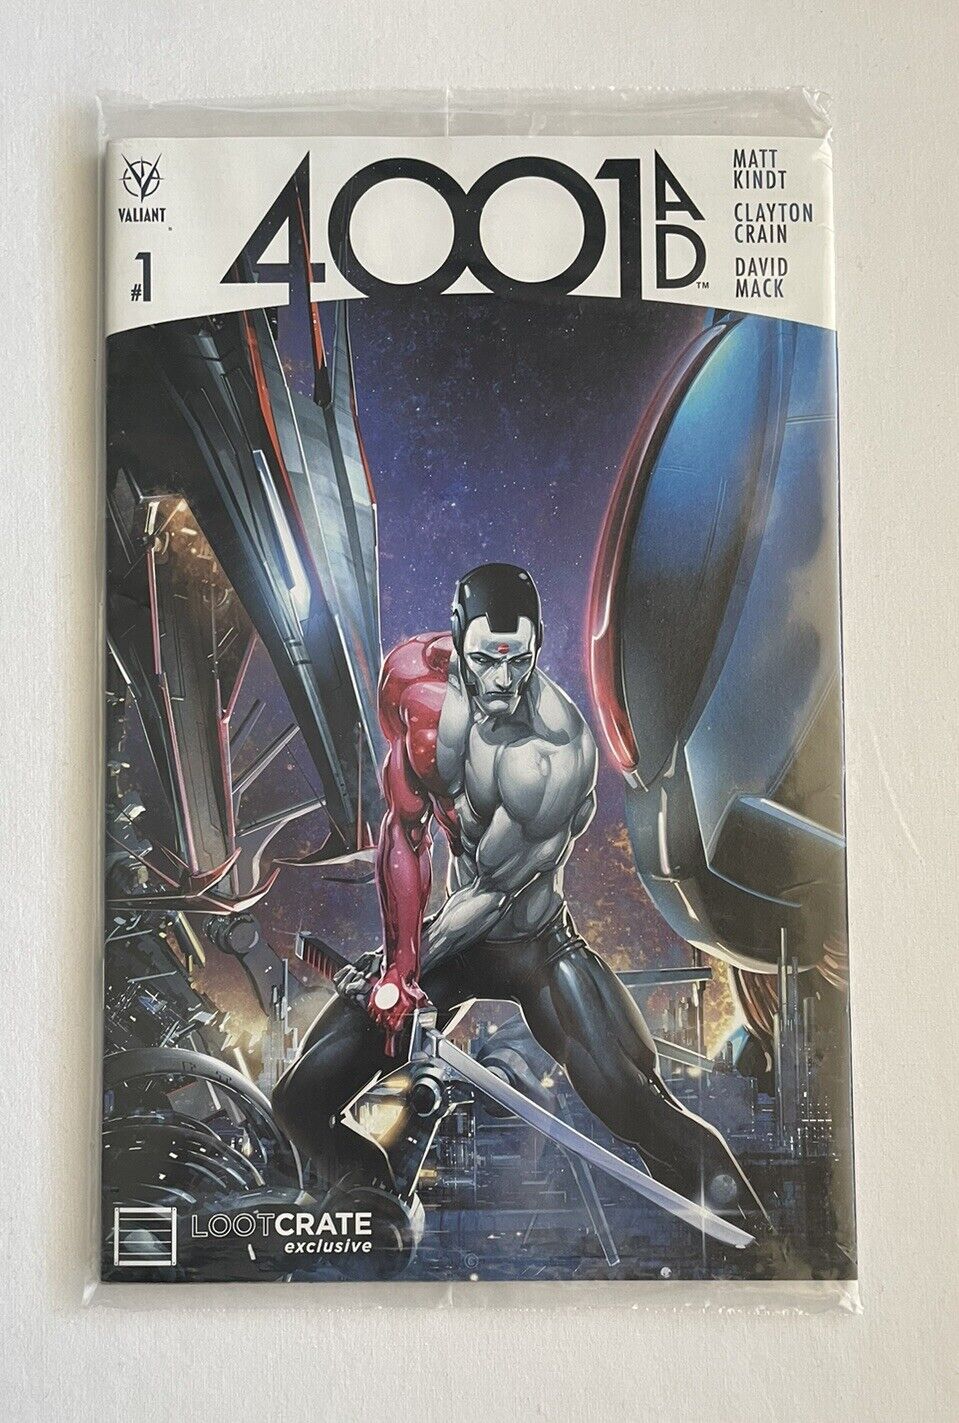 NEW SEALED Loot Crate July Valiant 4001 AD #1 Comic Book Variant RARE EXCLUSIVE